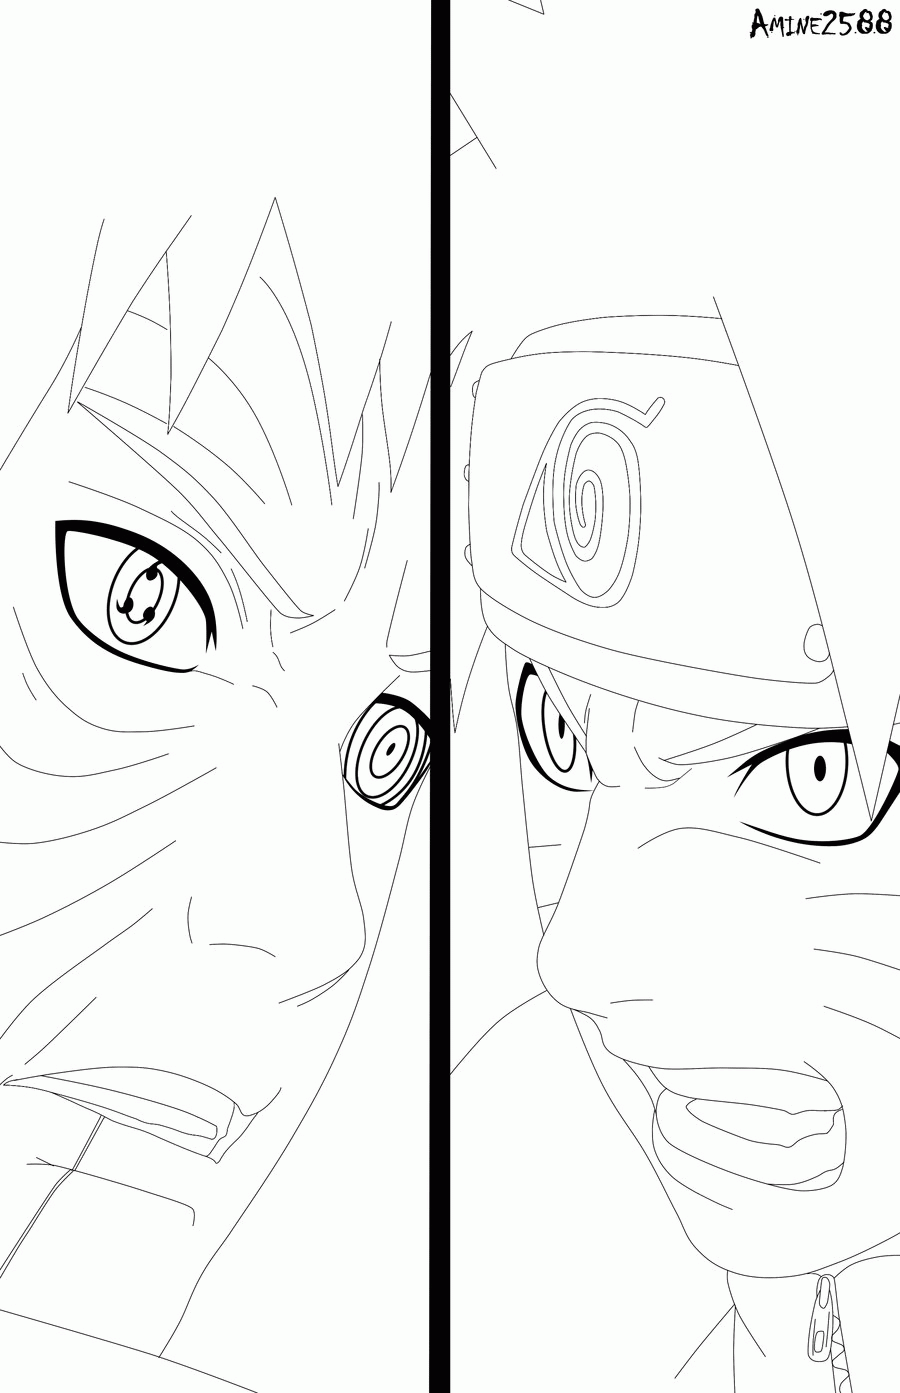 Coloring Pages Naruto | Cooloring.com